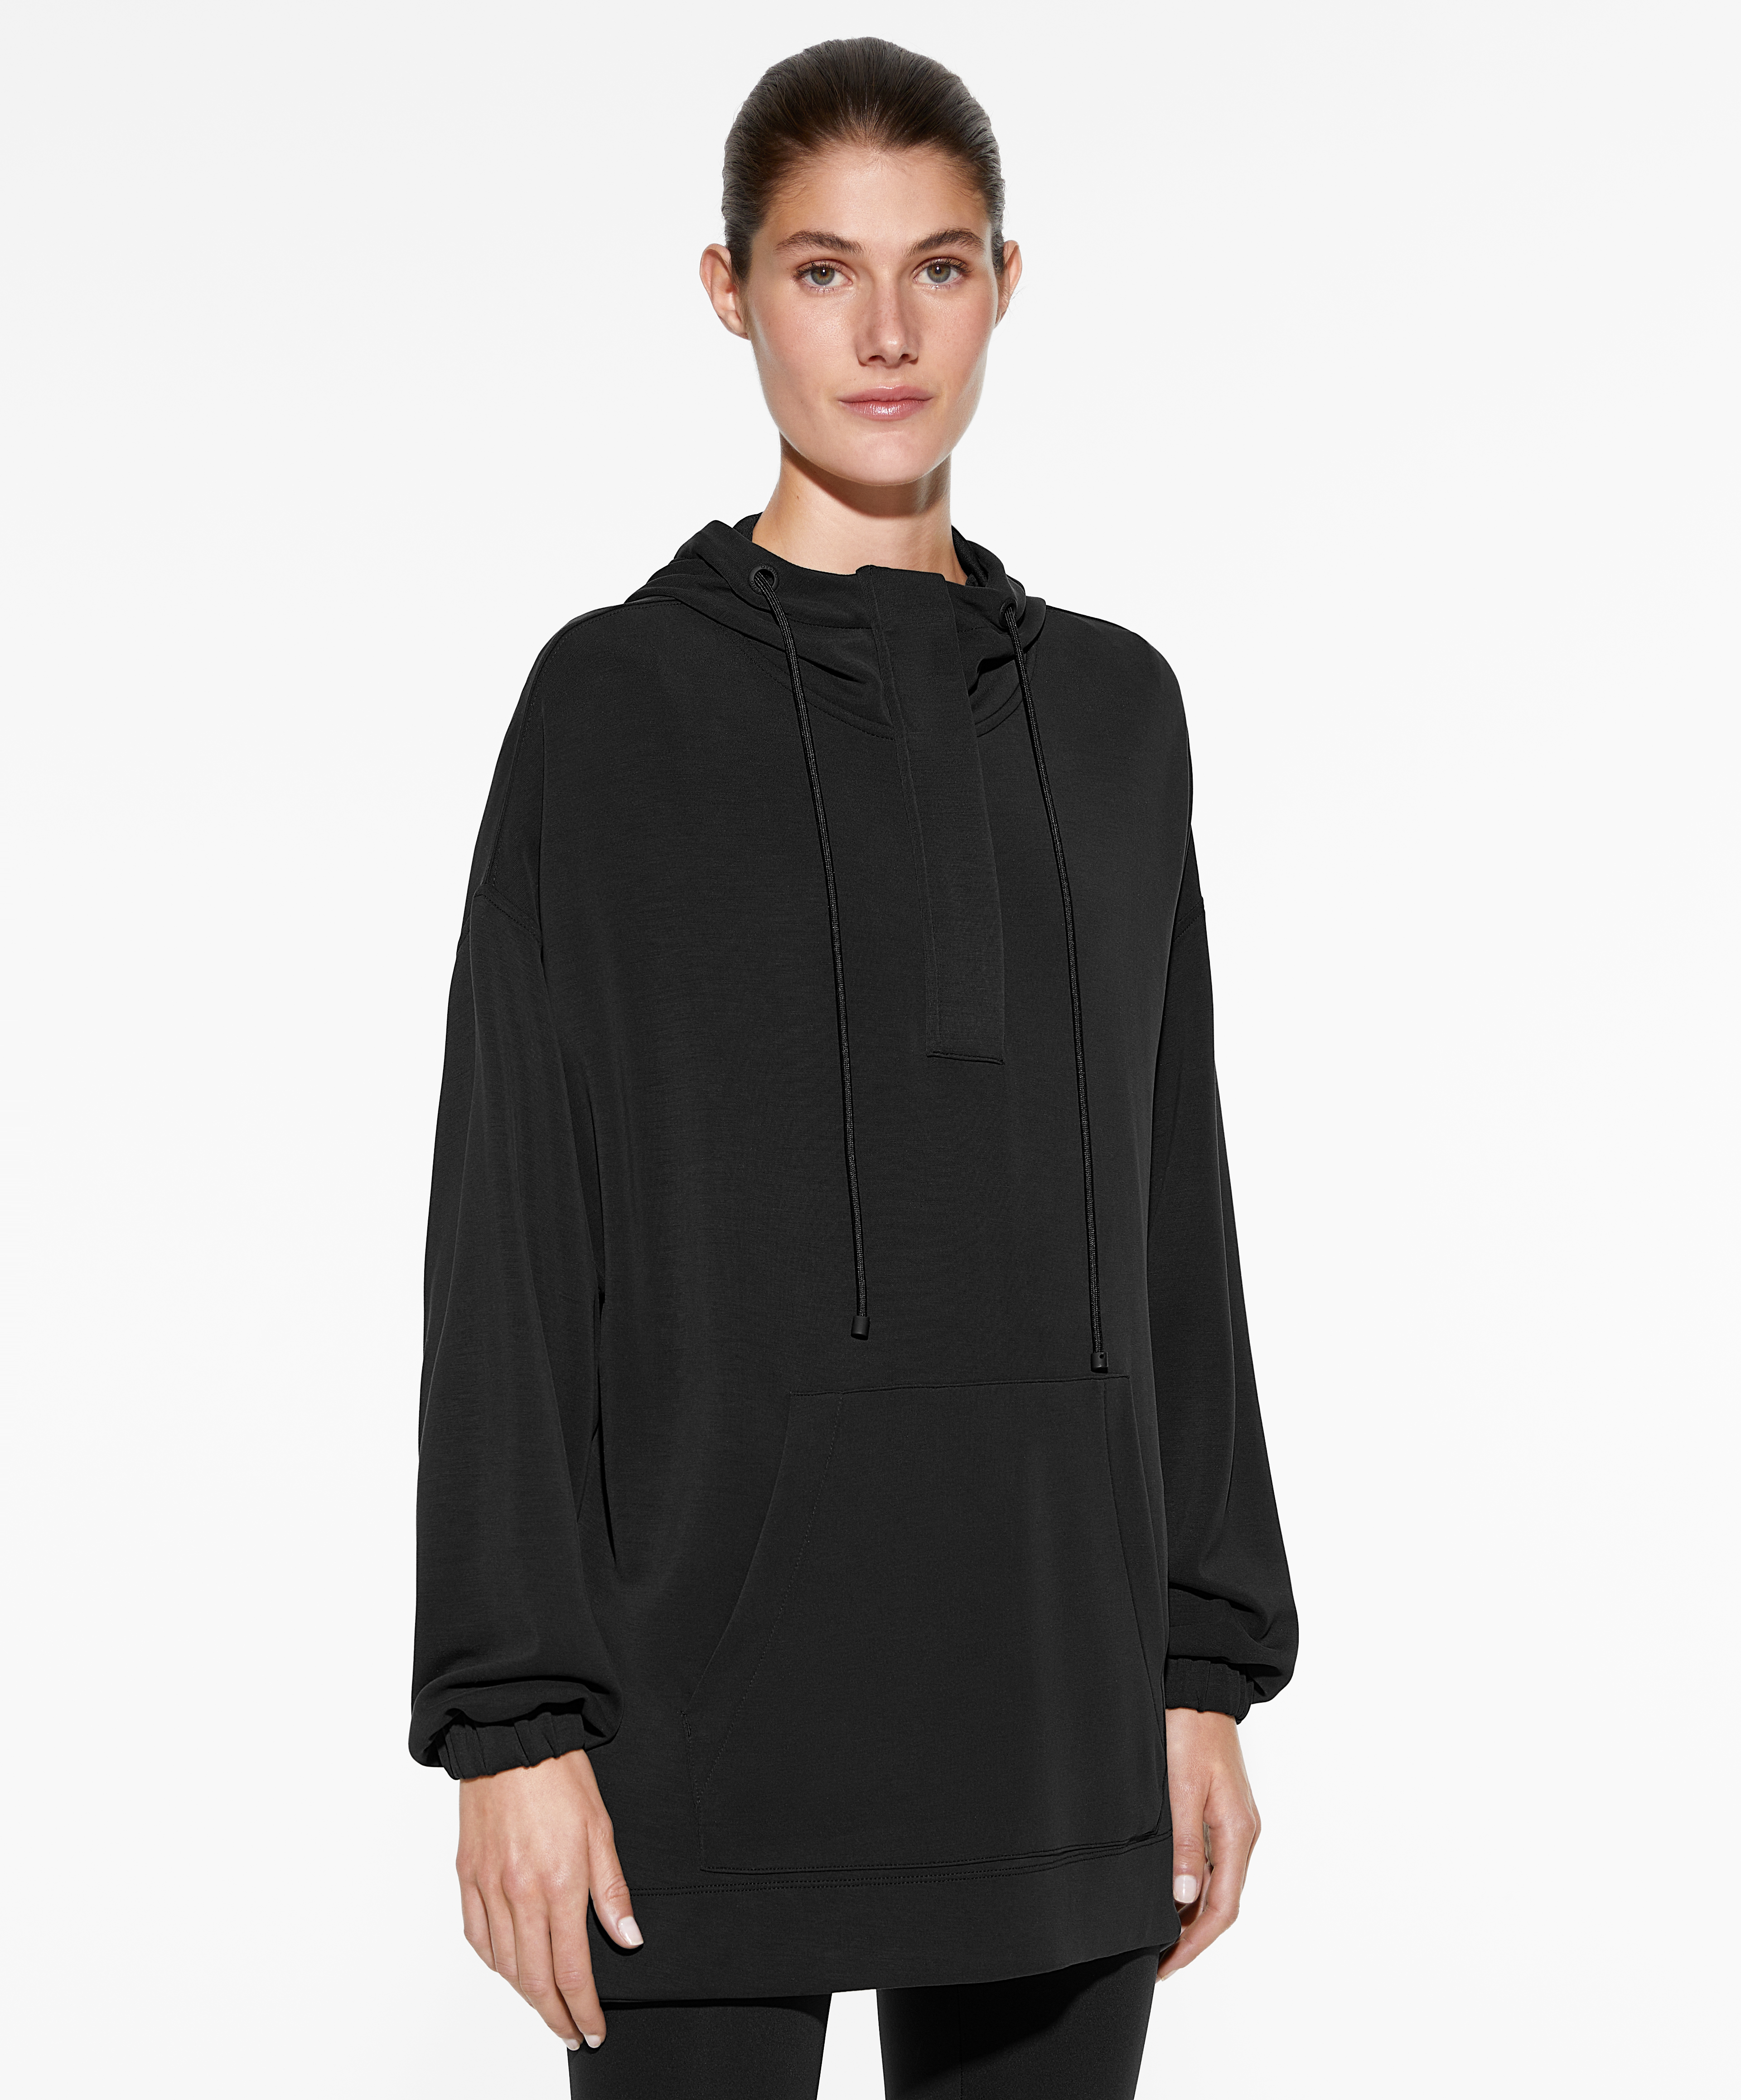 Zip soft touch modal oversize sweater